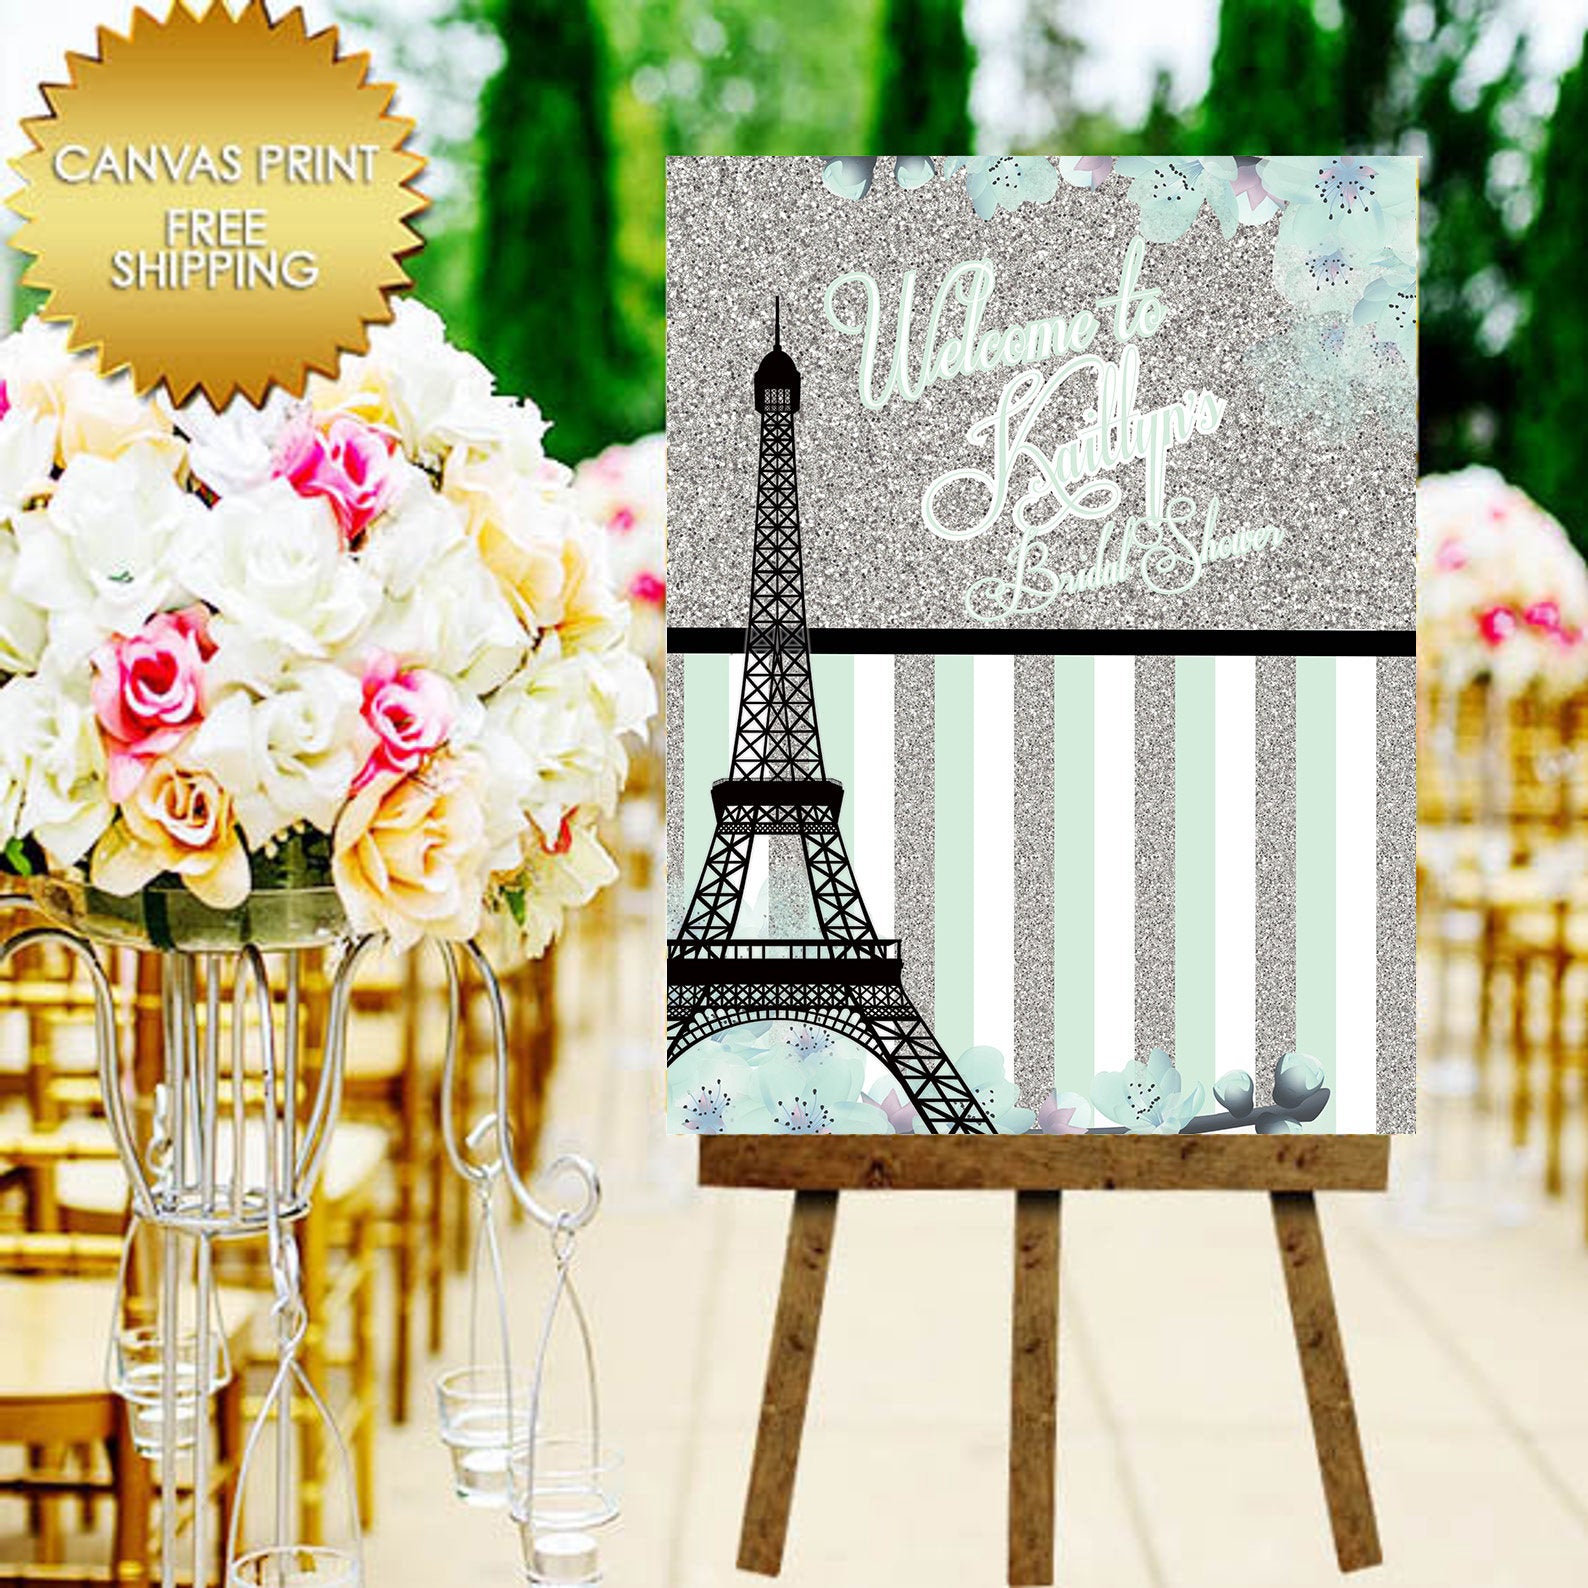 Poster Board Baby Shower Sign, Welcome Sign,Canvas Print Sign, Paris canvas Sign, Paris Step and Repeat, Bridal shower Backdrop,Paris canvas